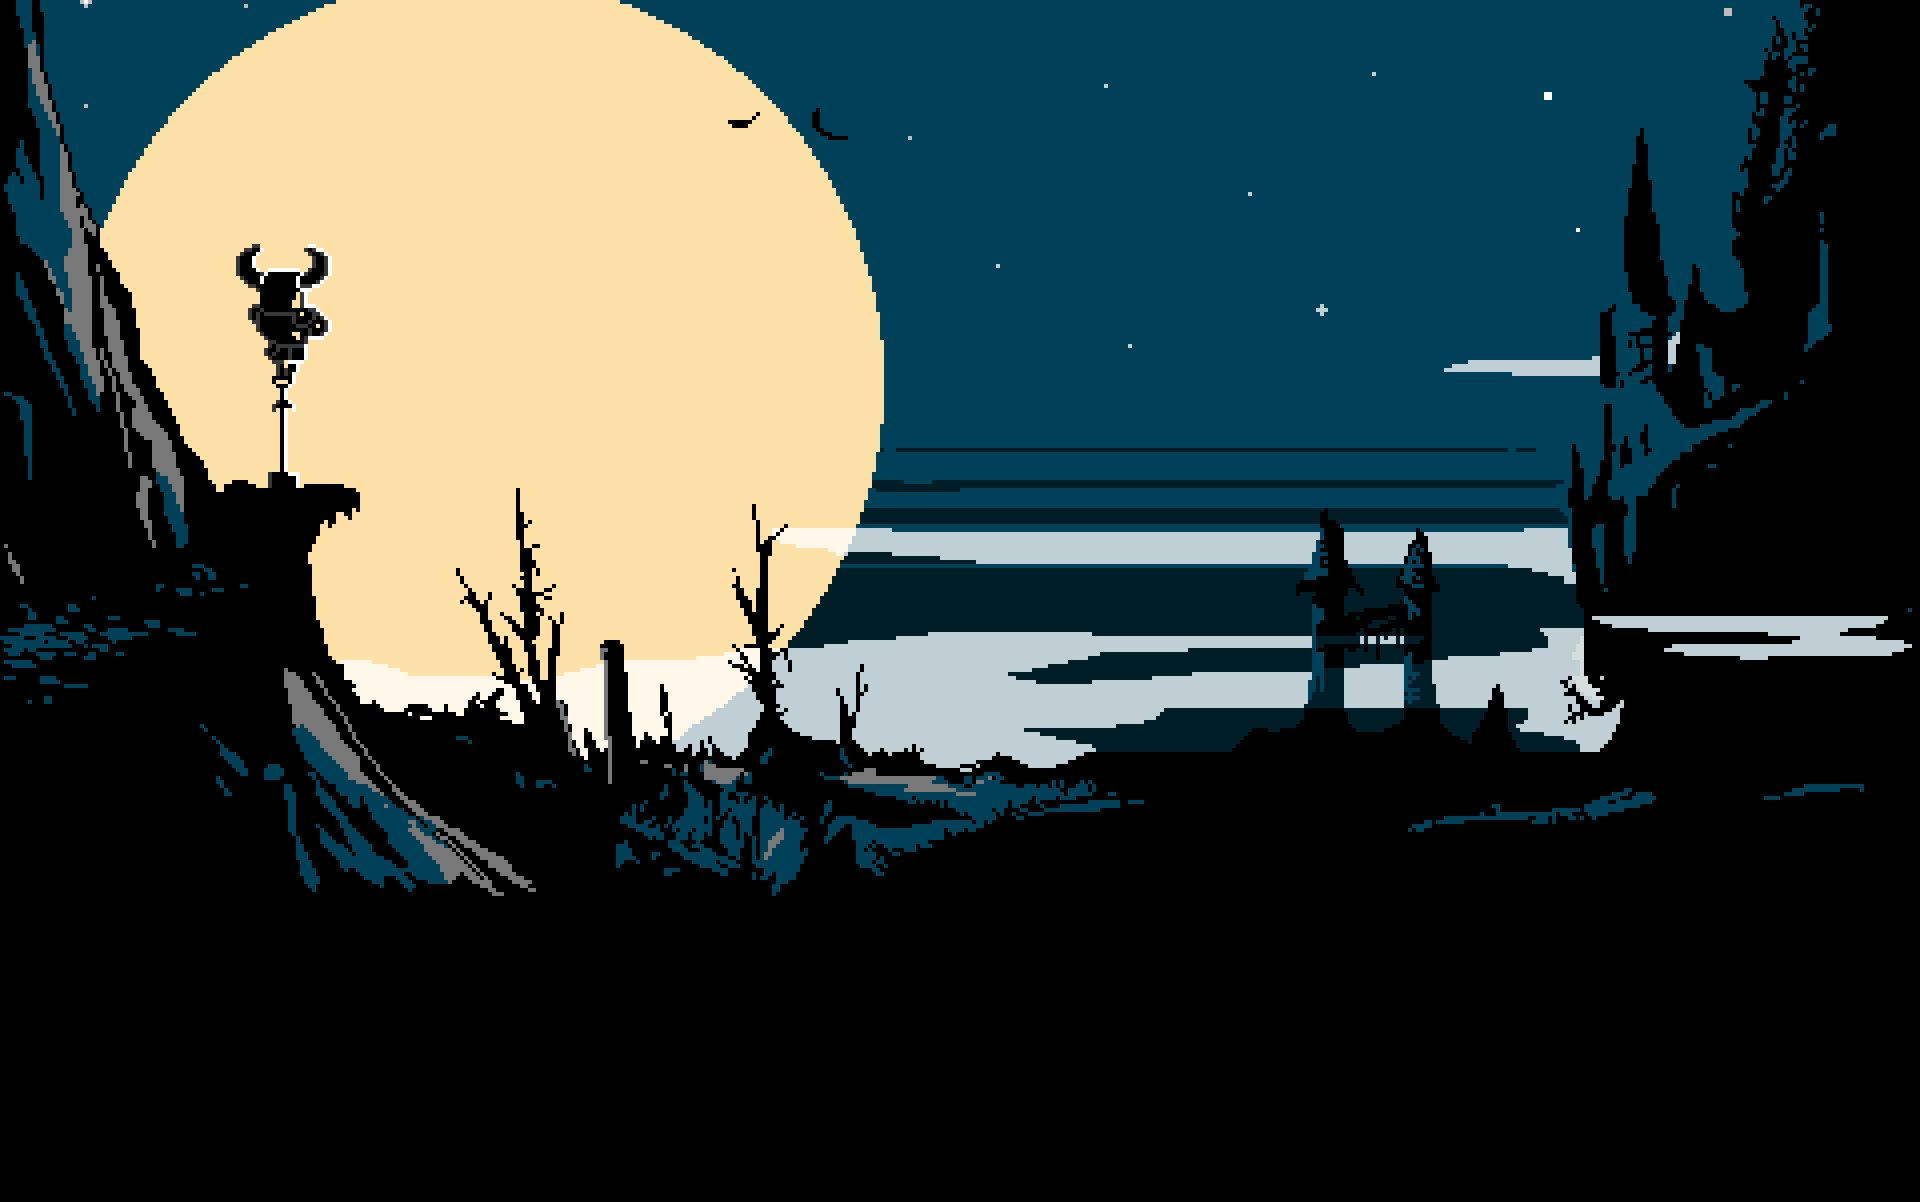 Shovel Knight Gazing At The Moon In A Serene Night Landscape Background